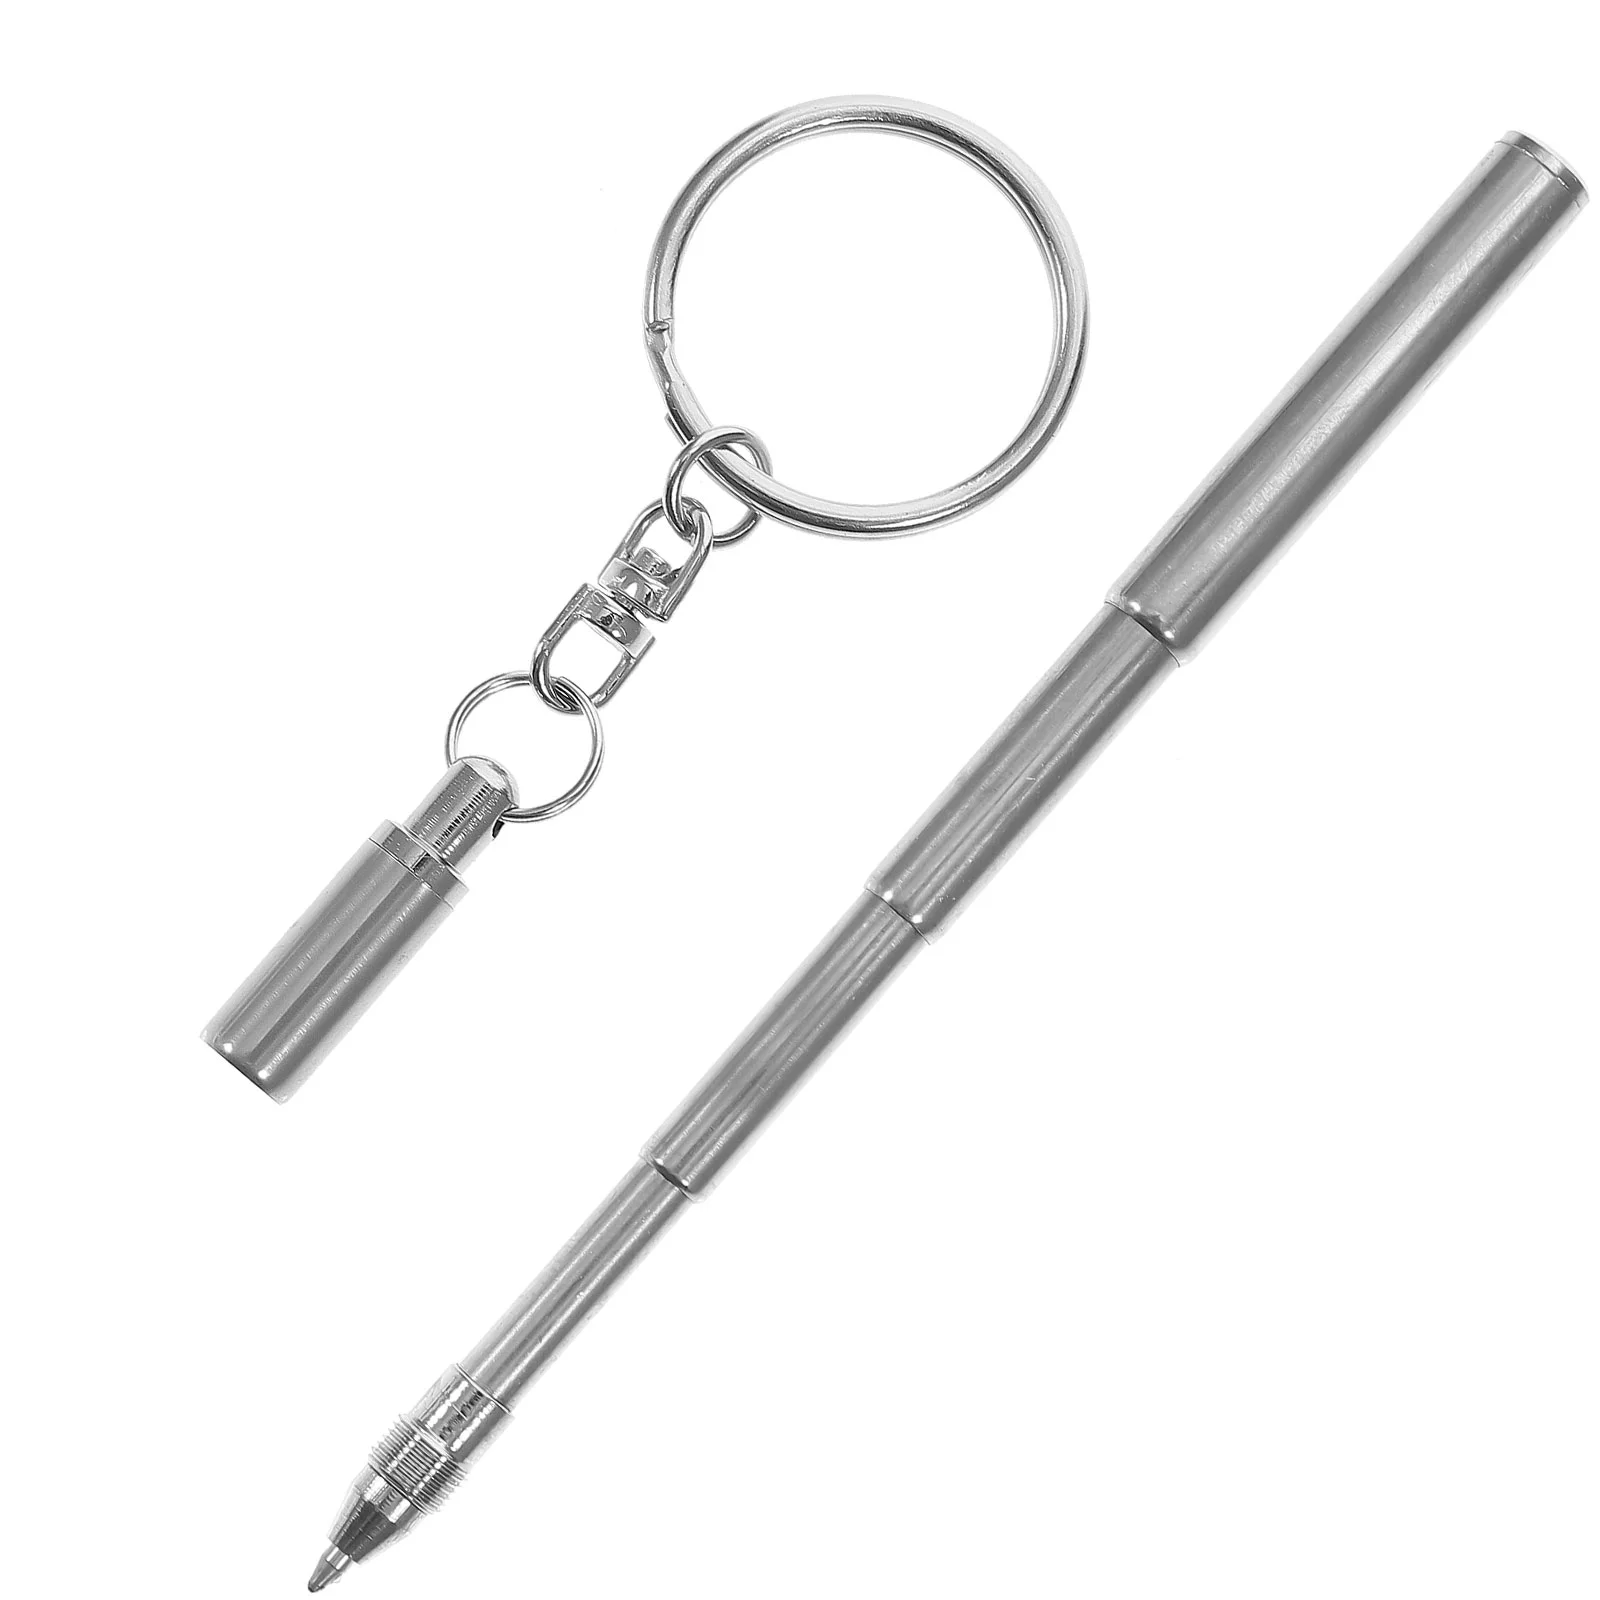 Retractable Pen Shape Keychain Mini Metal Key Ring Portable Stainless Steel Telescopic Ballpoint Pen Keychain Tools ring box square portable wood vintage design earring box for wedding jewelry organizer ring gift case